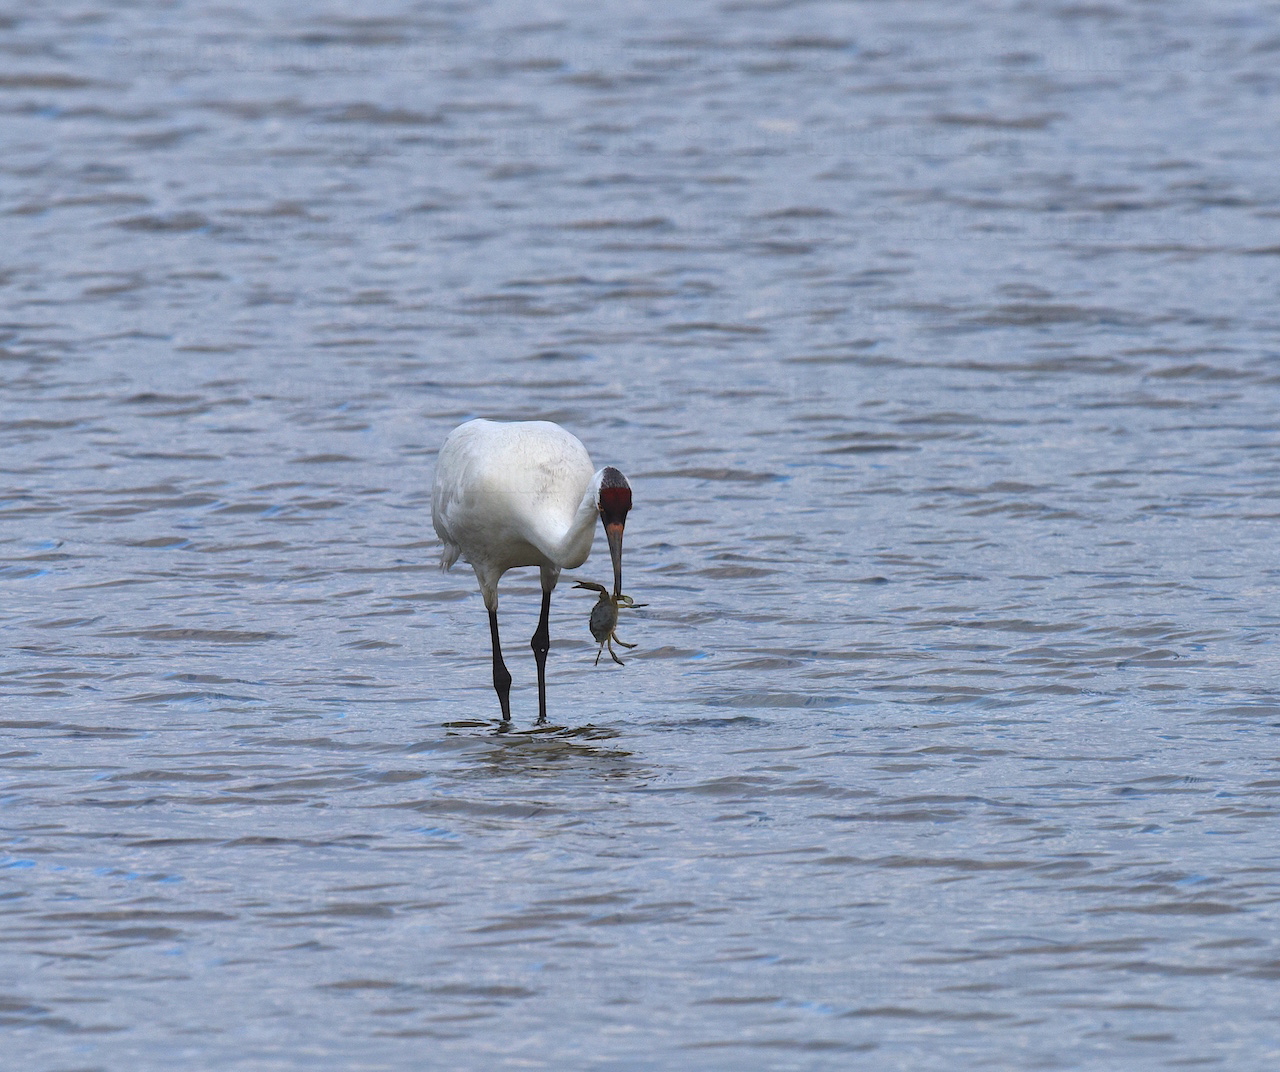 Image of whooping crane in water with crab